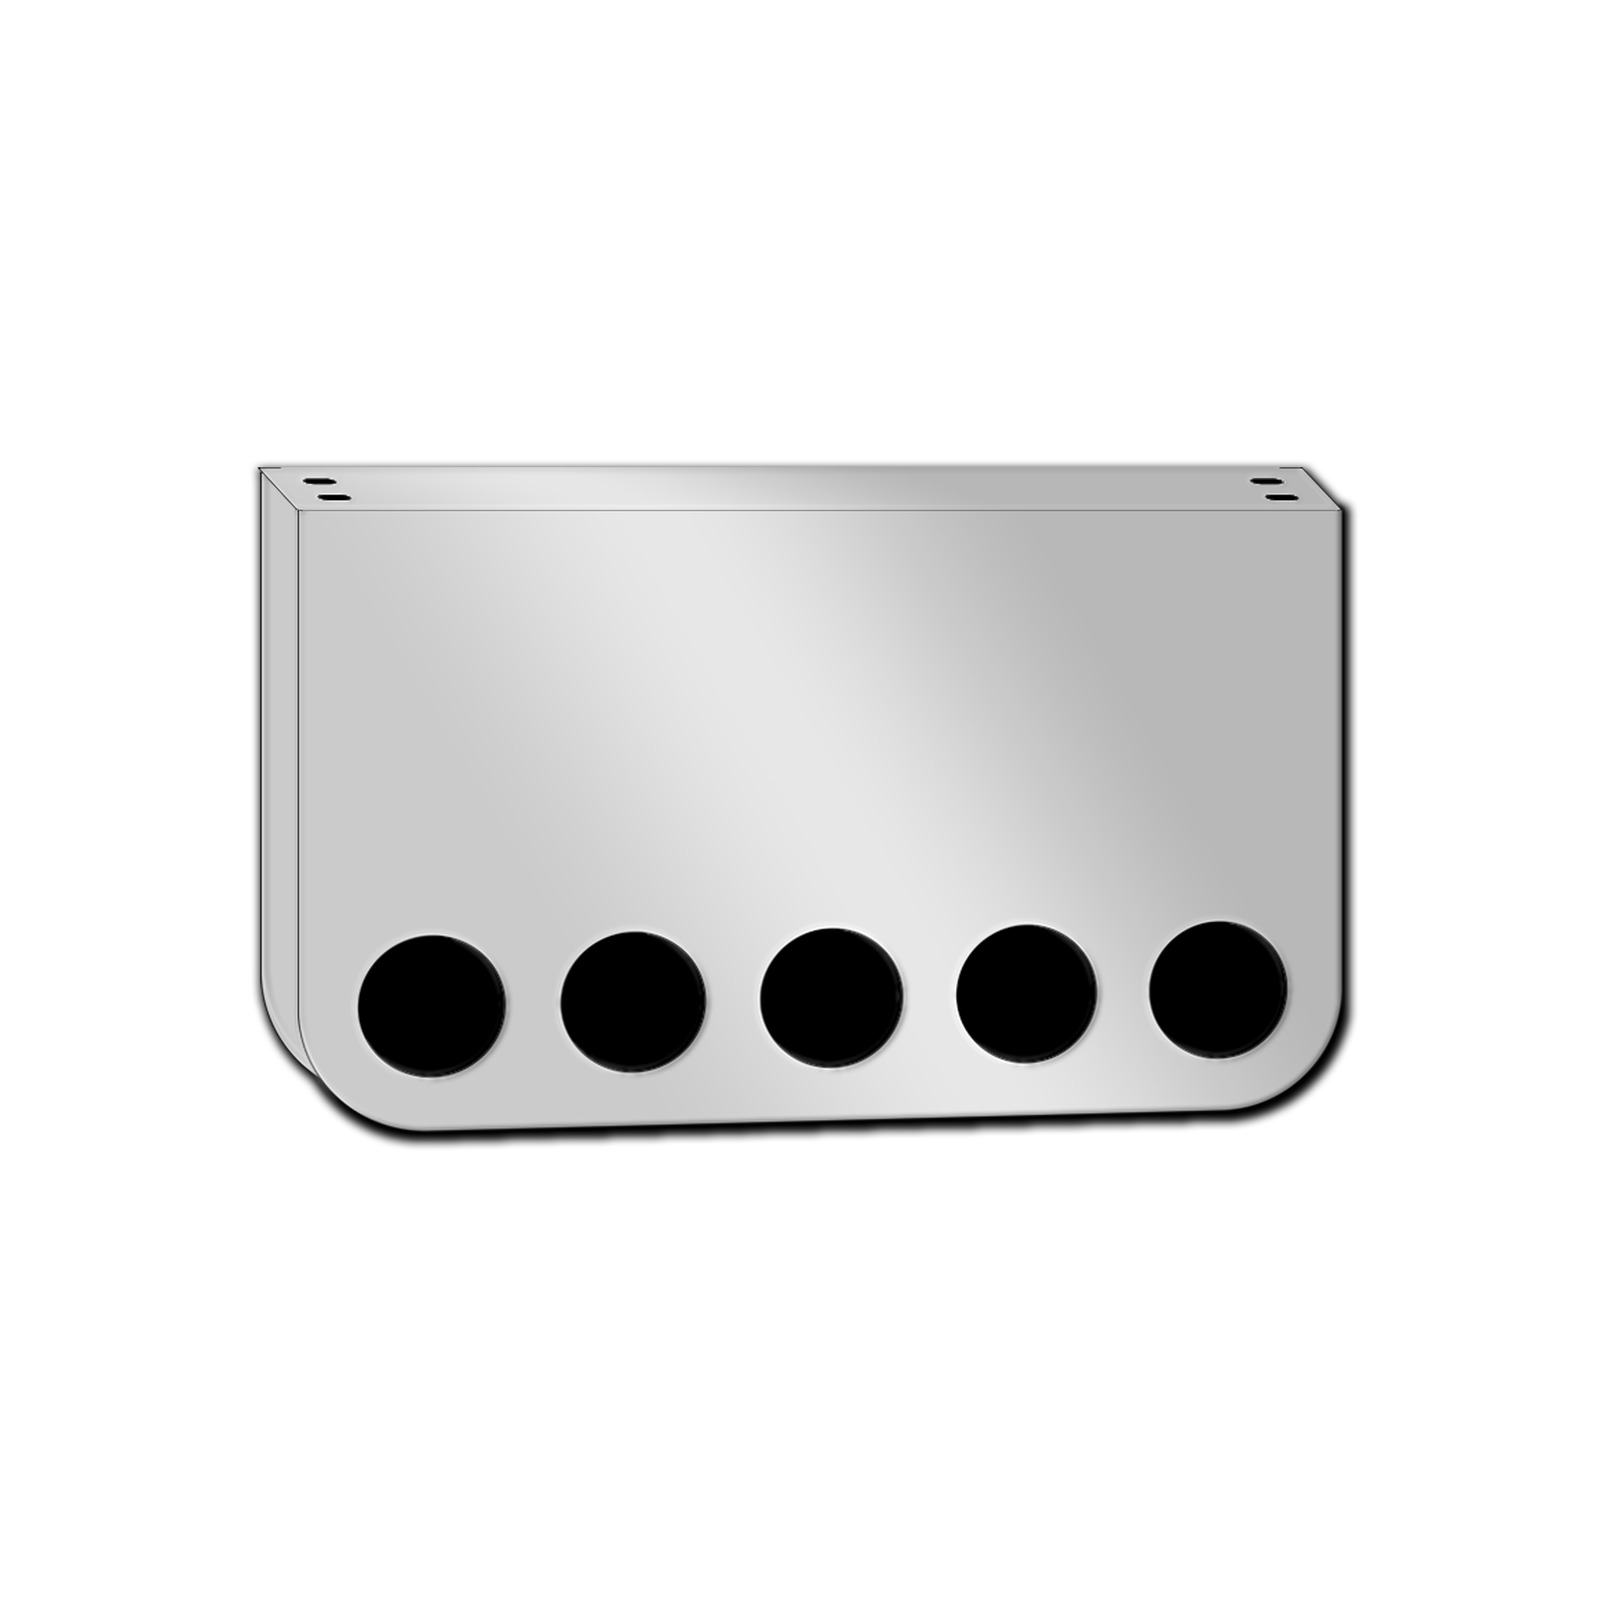 Rear Center Panel 20 Inch RC Style Stainless Steel  W/ 5 - 4 Inch On Front And